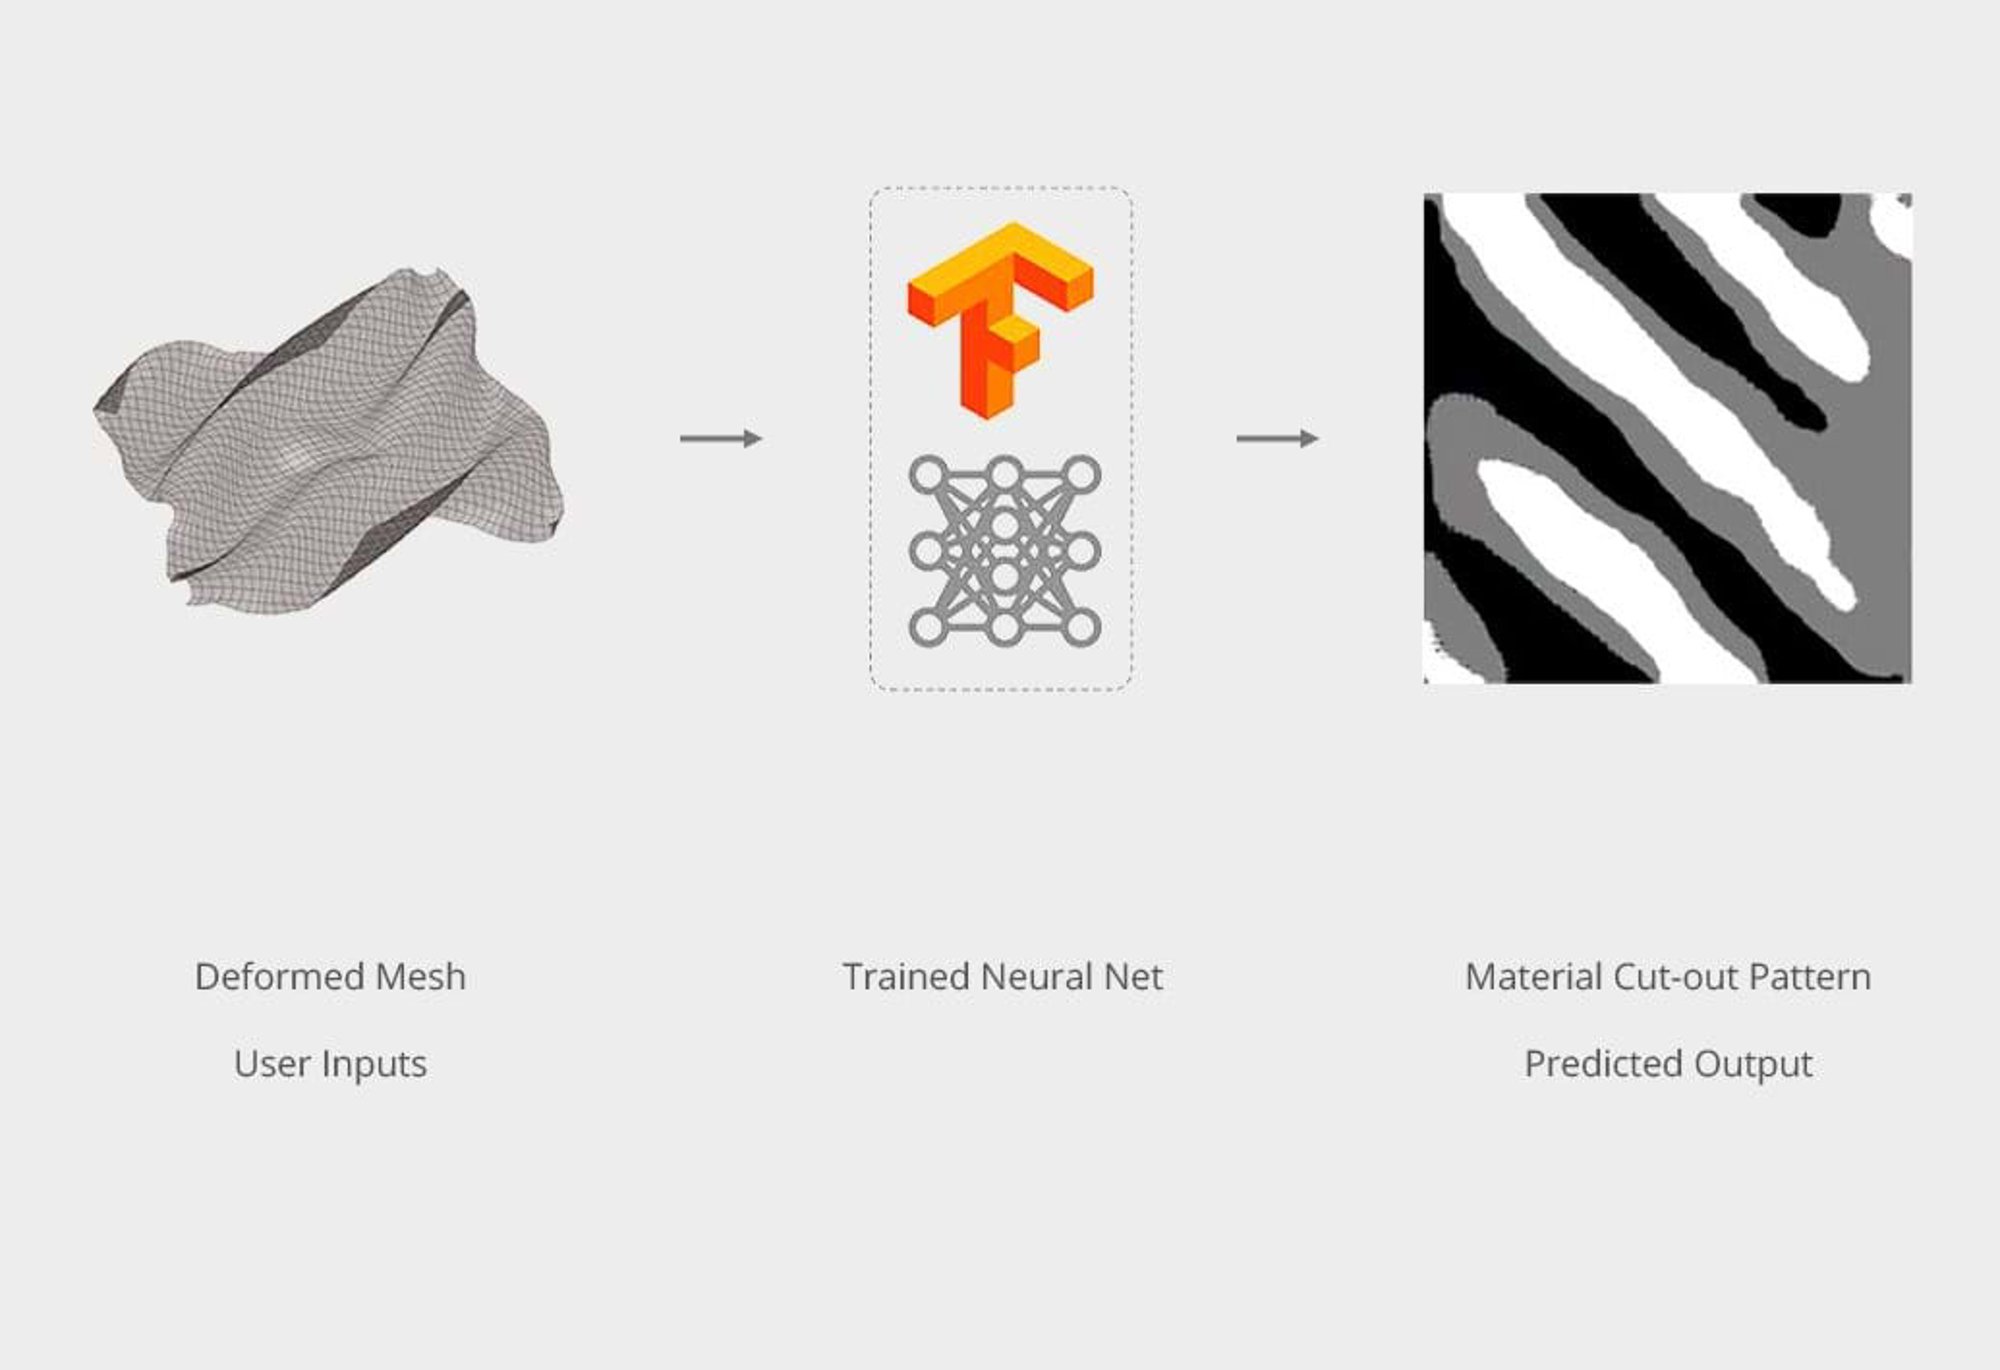 A material with a desired deformed state (left) is inputted into the trained neural network (centre) and the required material cut-out pattern is provided by the system (right). This is the reverse of how the problem was initially conceived, where the diagram shows how an inverse problem is solved after the training has finished. © Foster + Partners / Autodesk